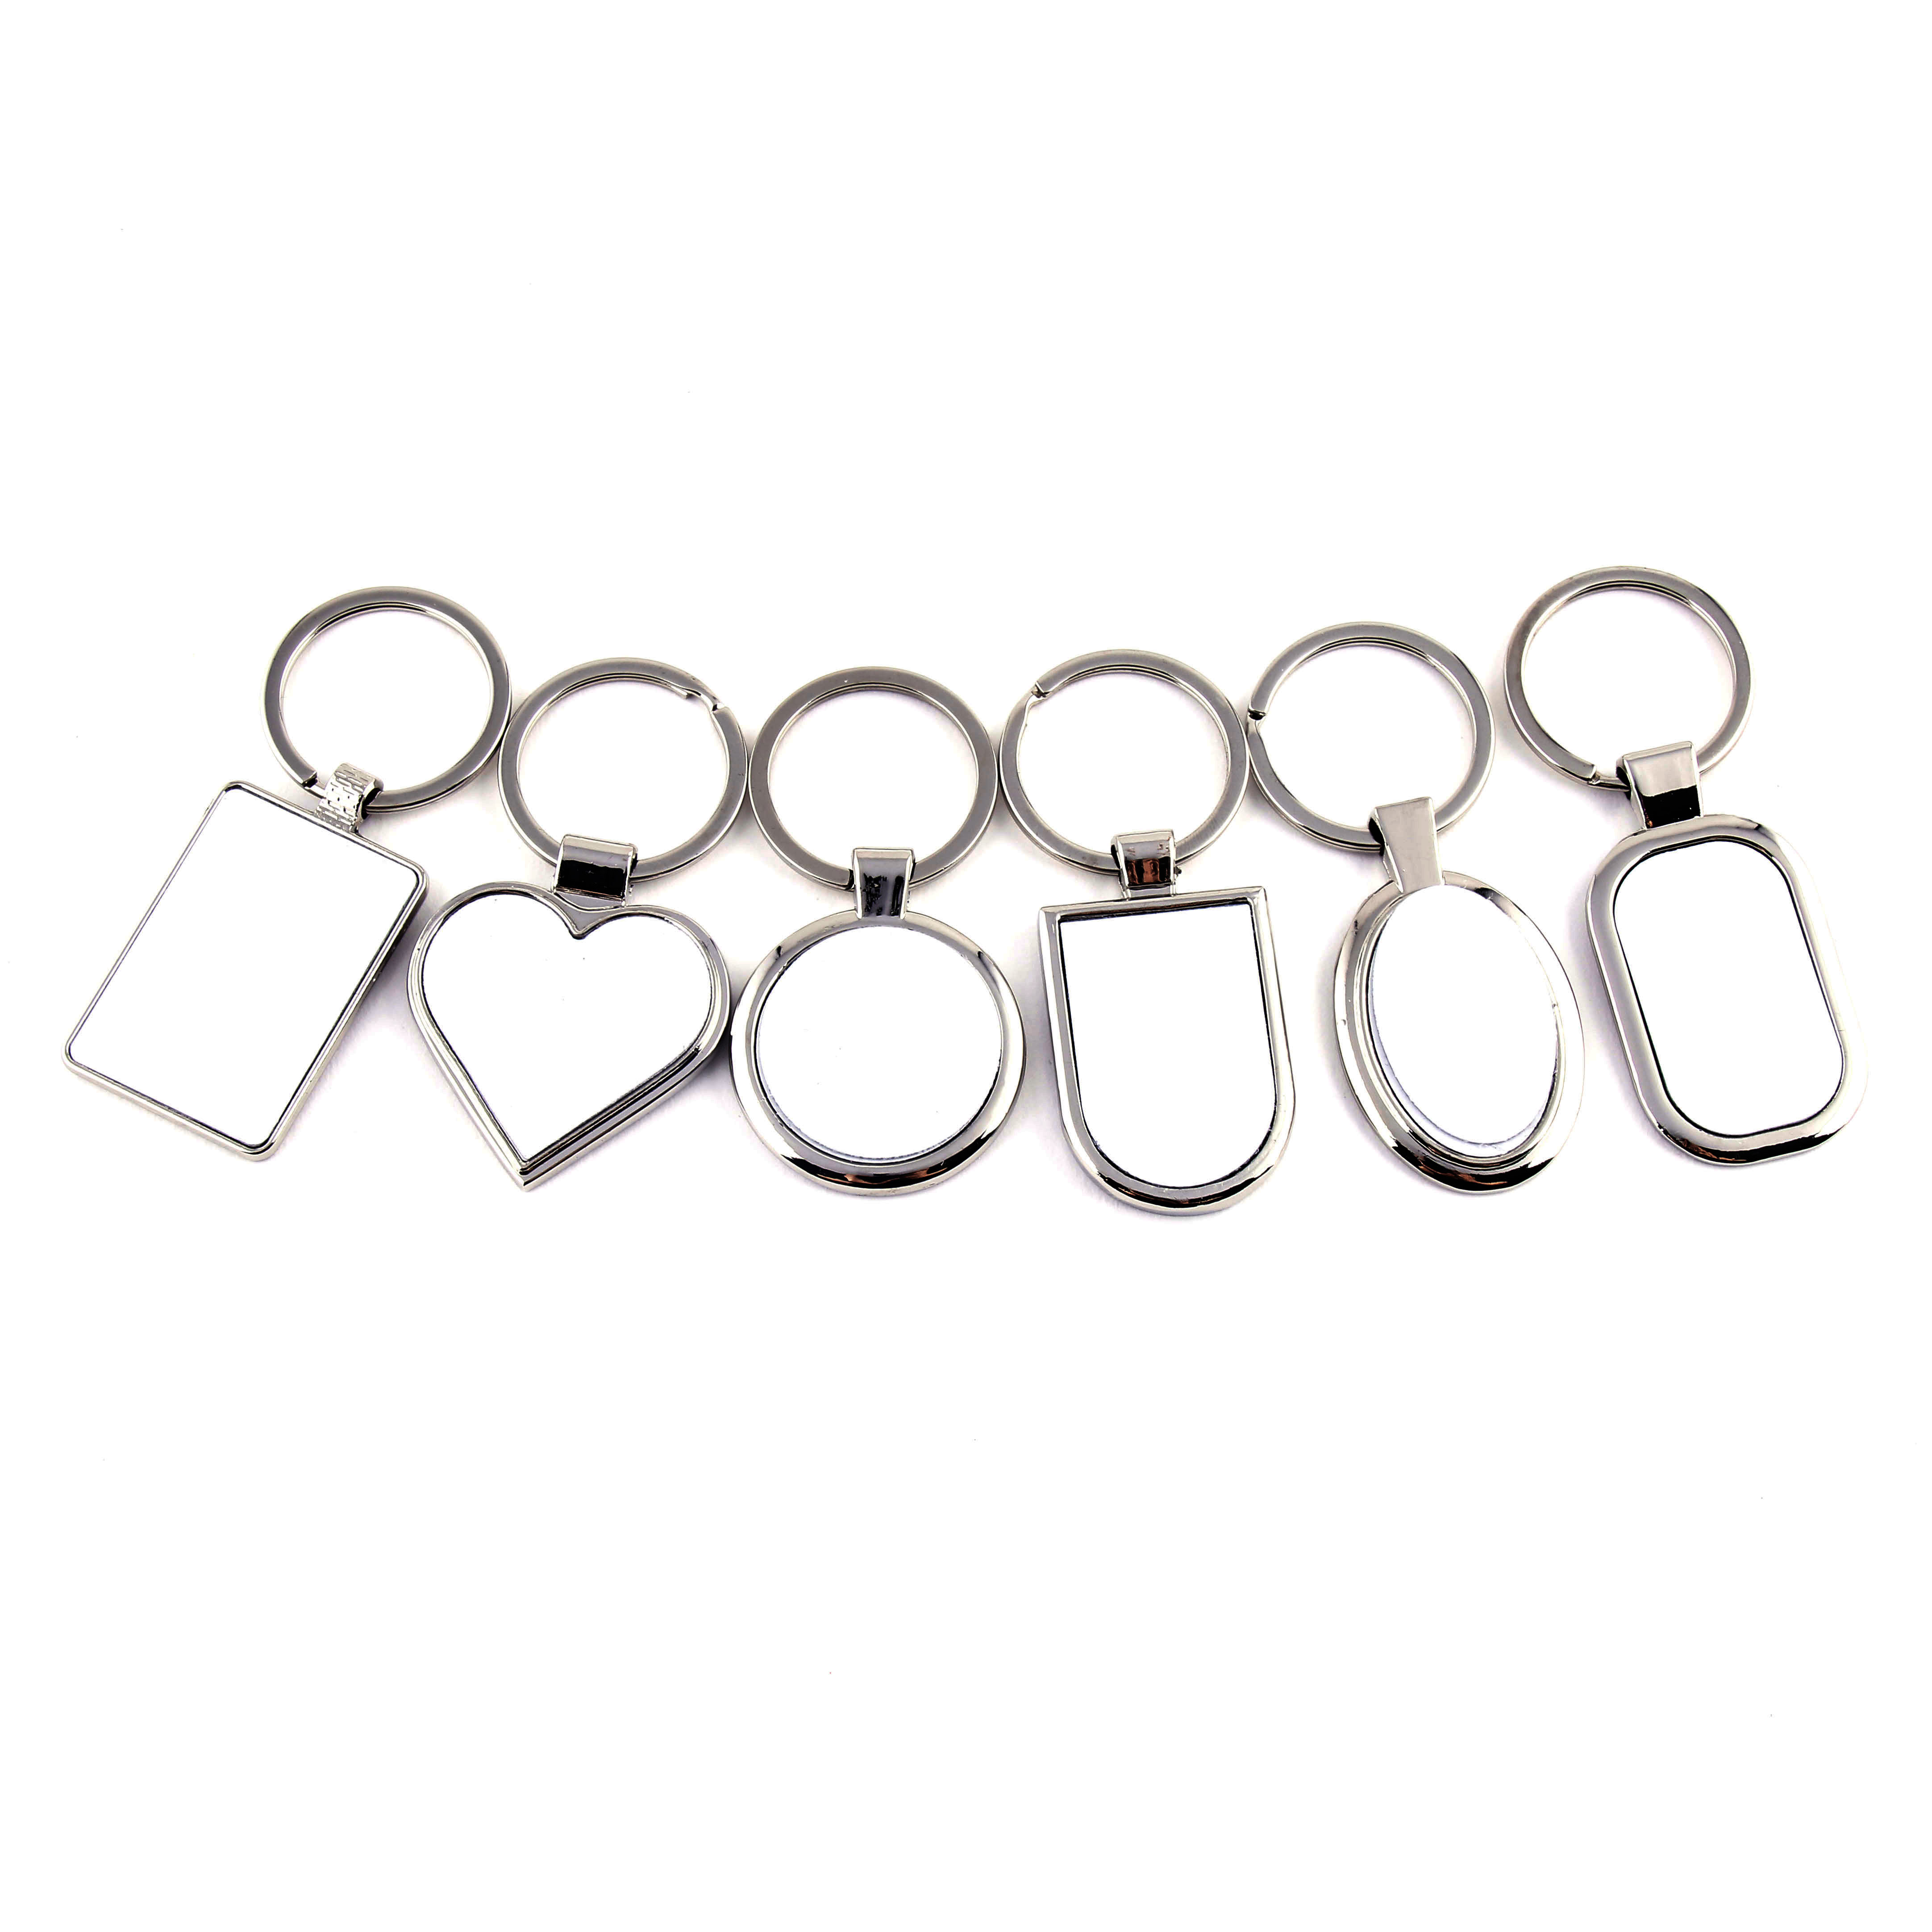 Customized Made Metal Blank Sublimation Keychains A22 - China